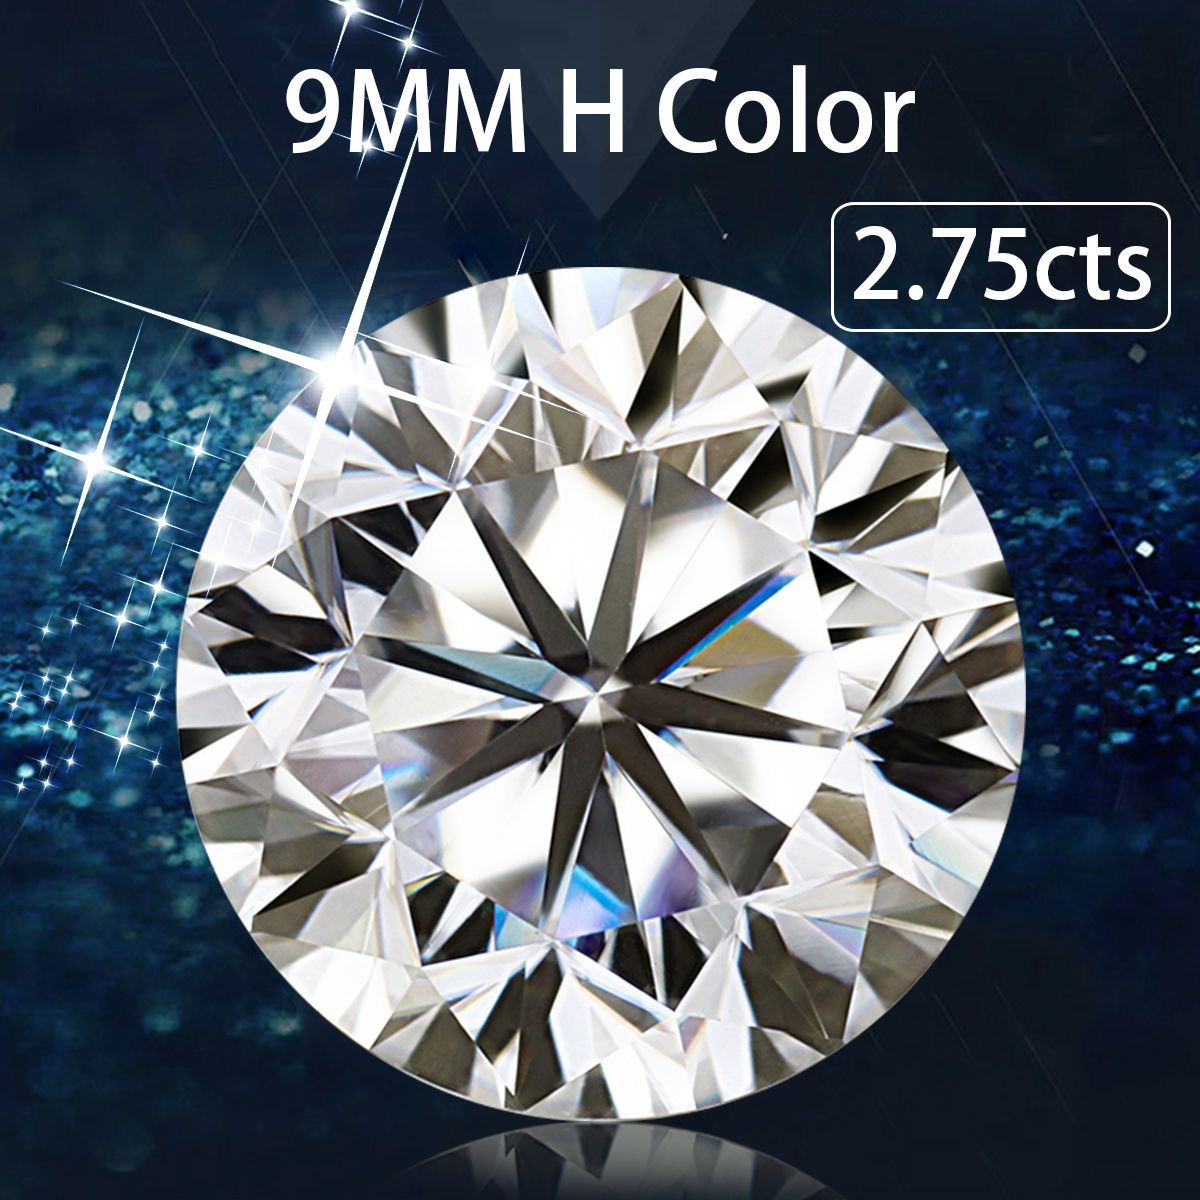 9mm-Natural-Brilliant-White-Diamond-H-Color-275cts-Round-VVS1-Clarity-Crystals-with-Box-1540255